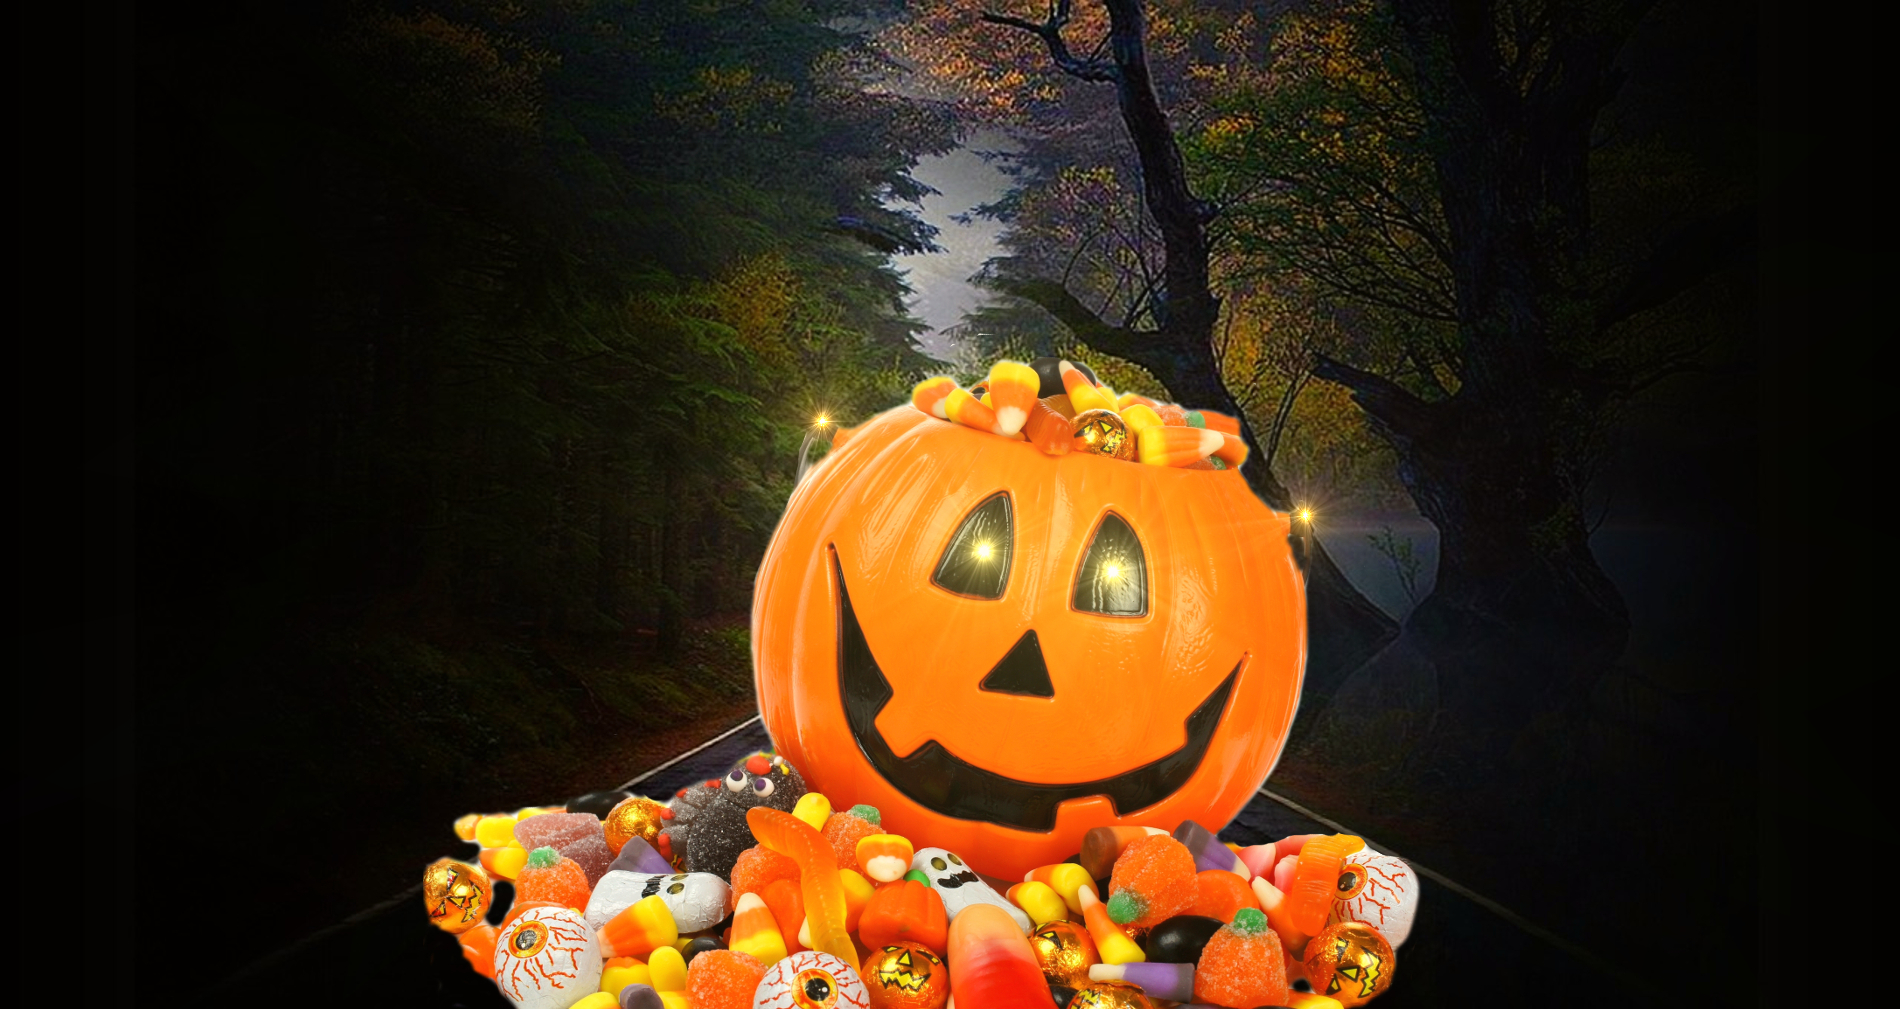 What’s The Last Day To Eat Halloween Candy?